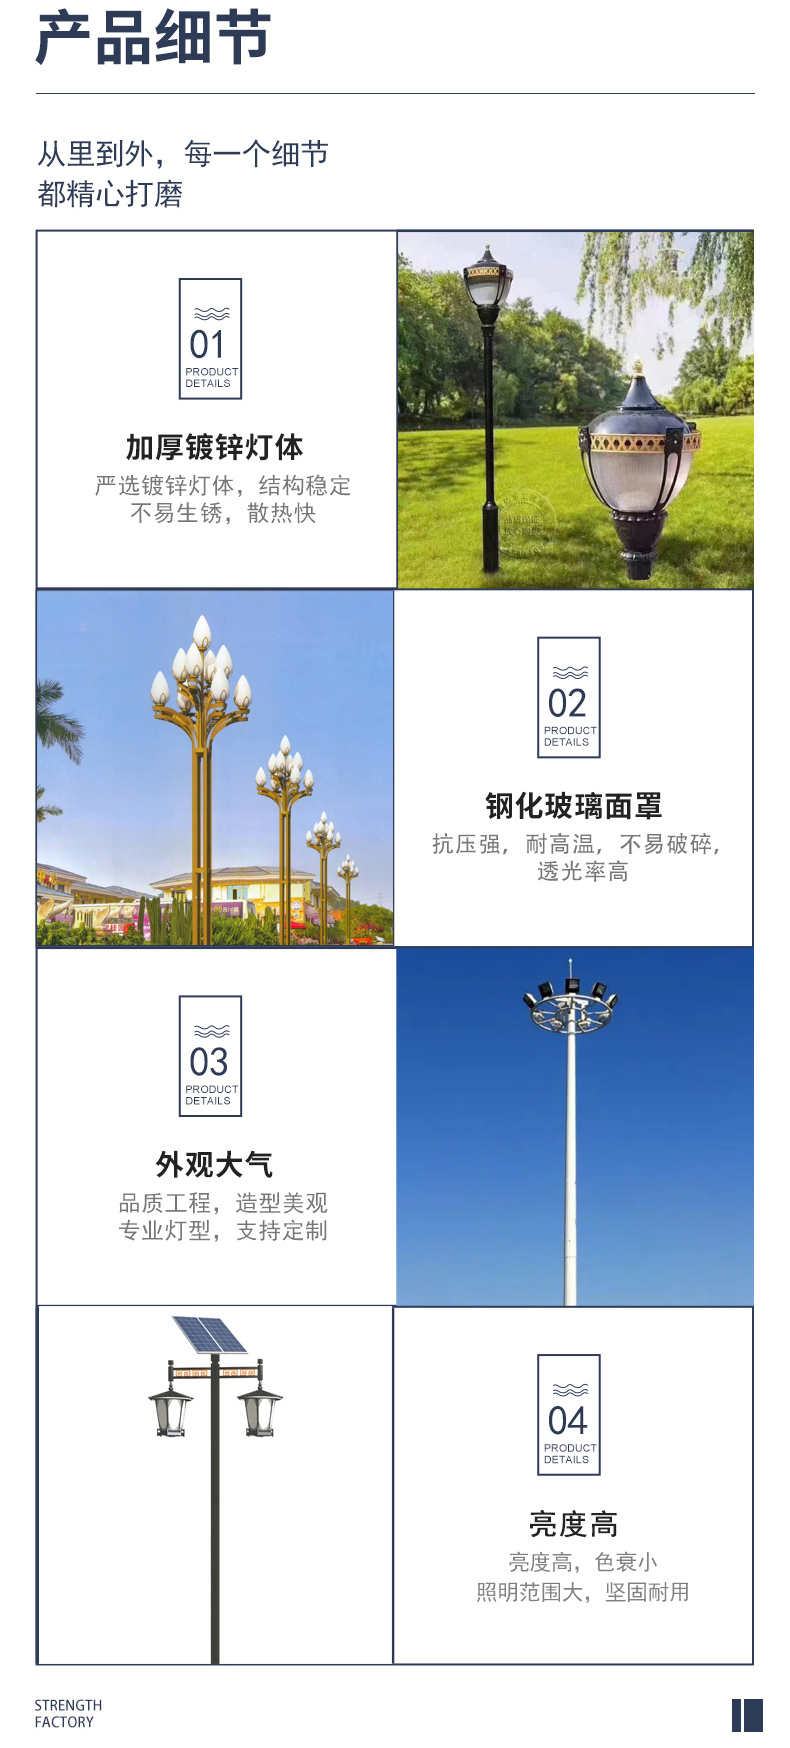 Jiuyi produces LED solar courtyard lights, with a 6-meter community garden landscape light and ultra bright outdoor lighting